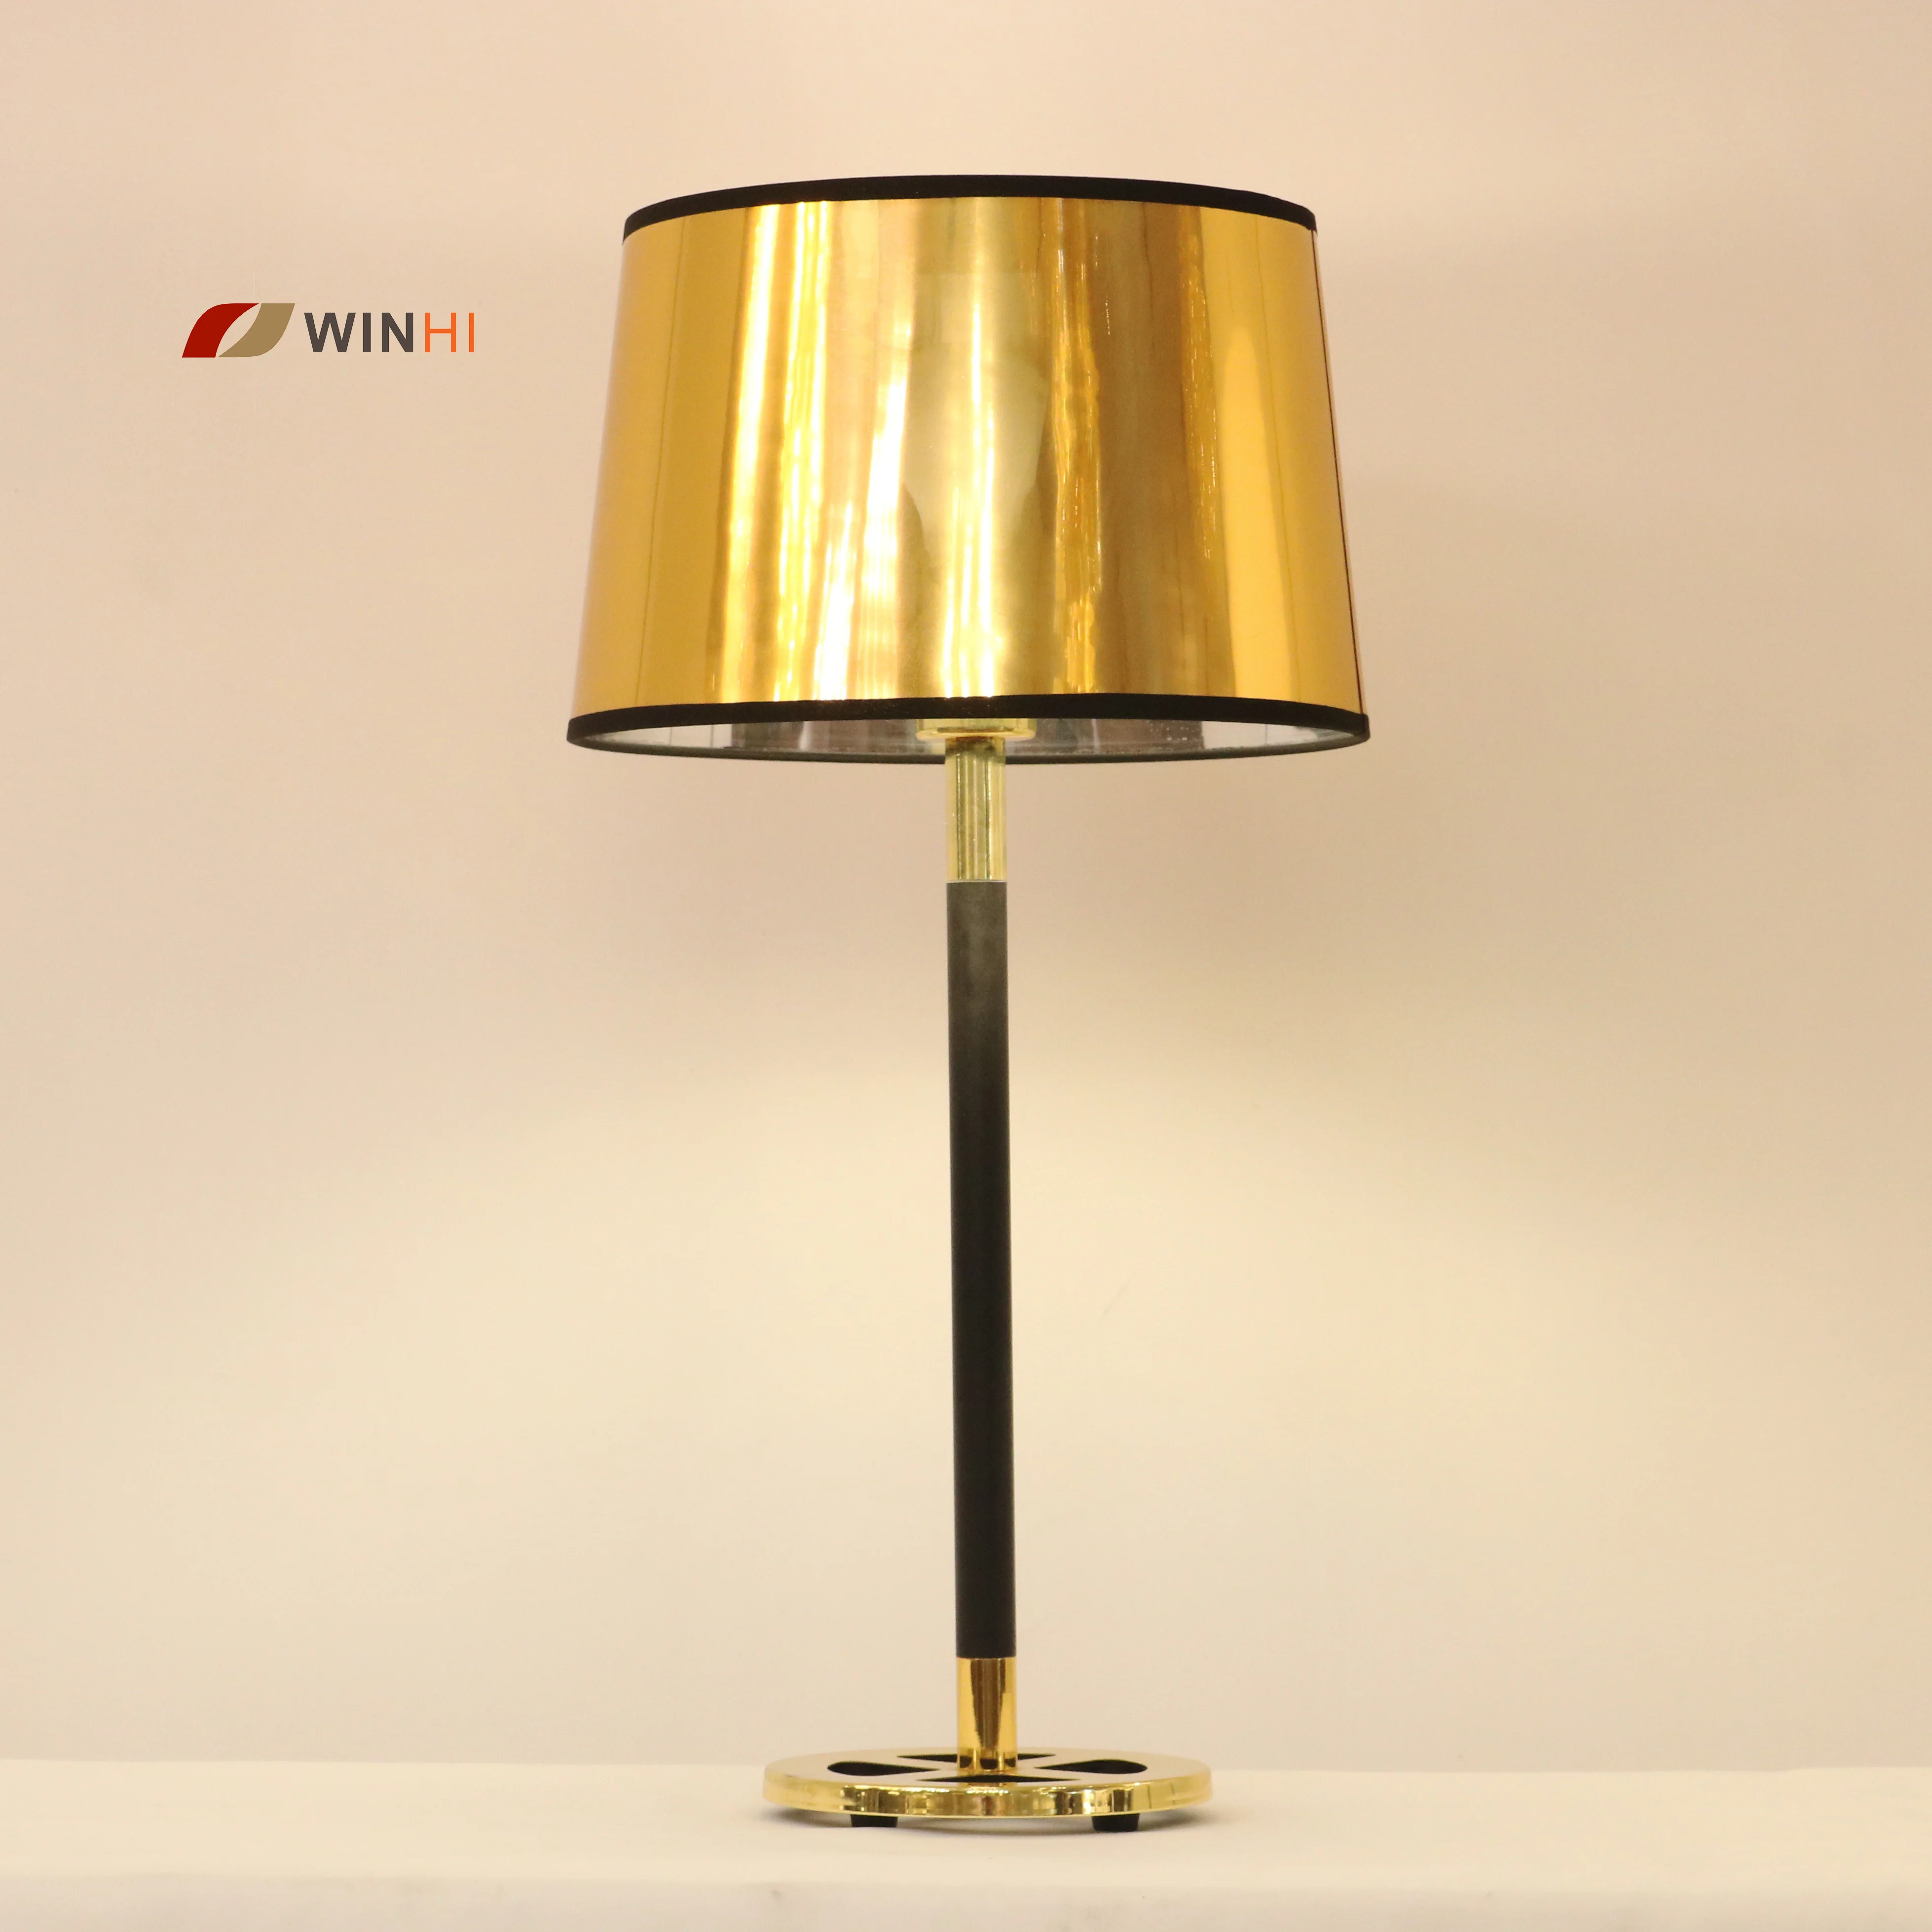 Cheap hotel bar cafe bedroom dining room decorative pvc shade led luxury gold table desk lamp